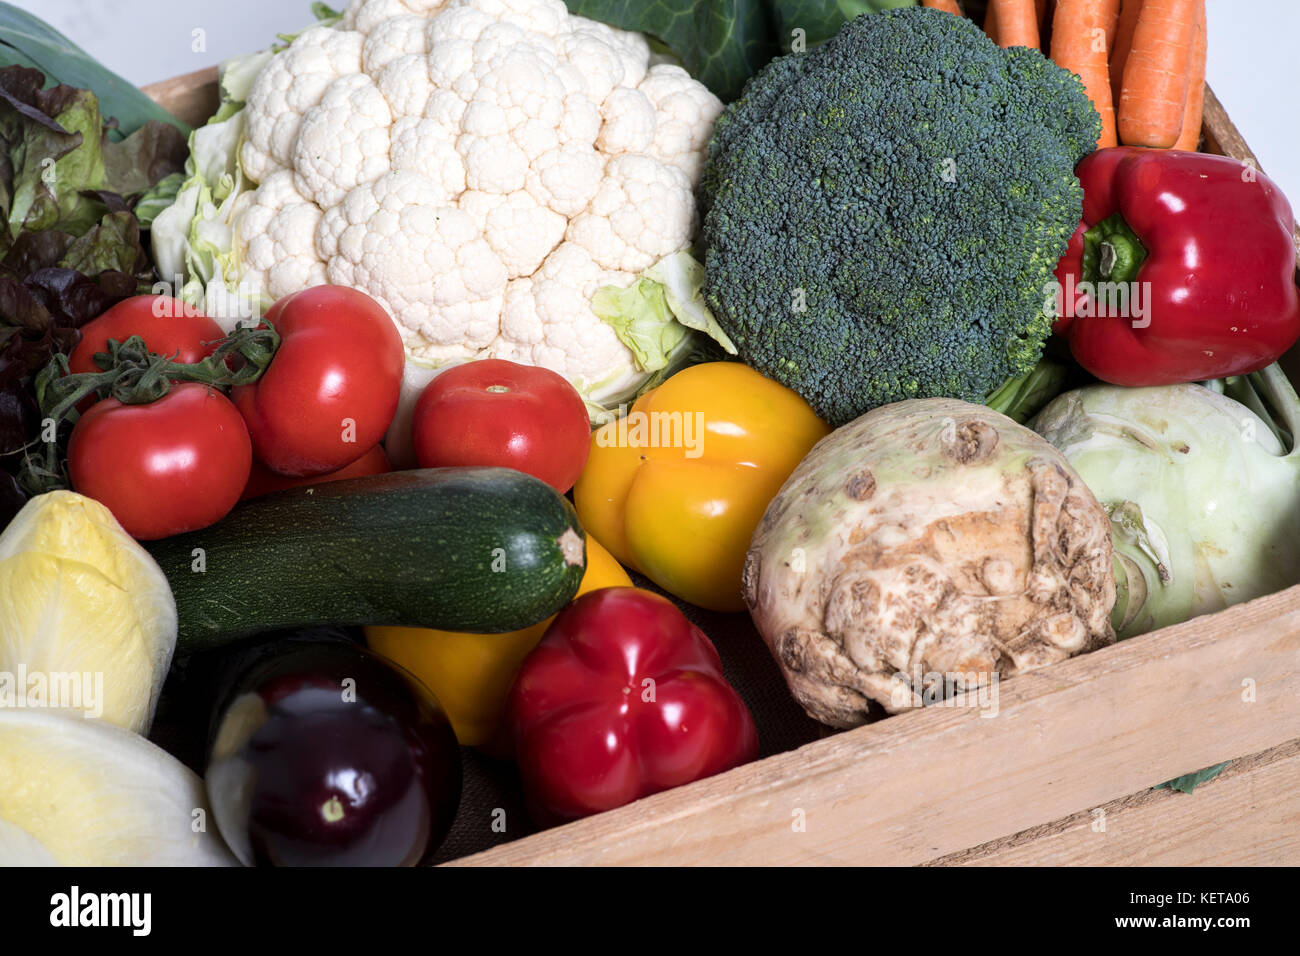 box with vegetables Stock Photo